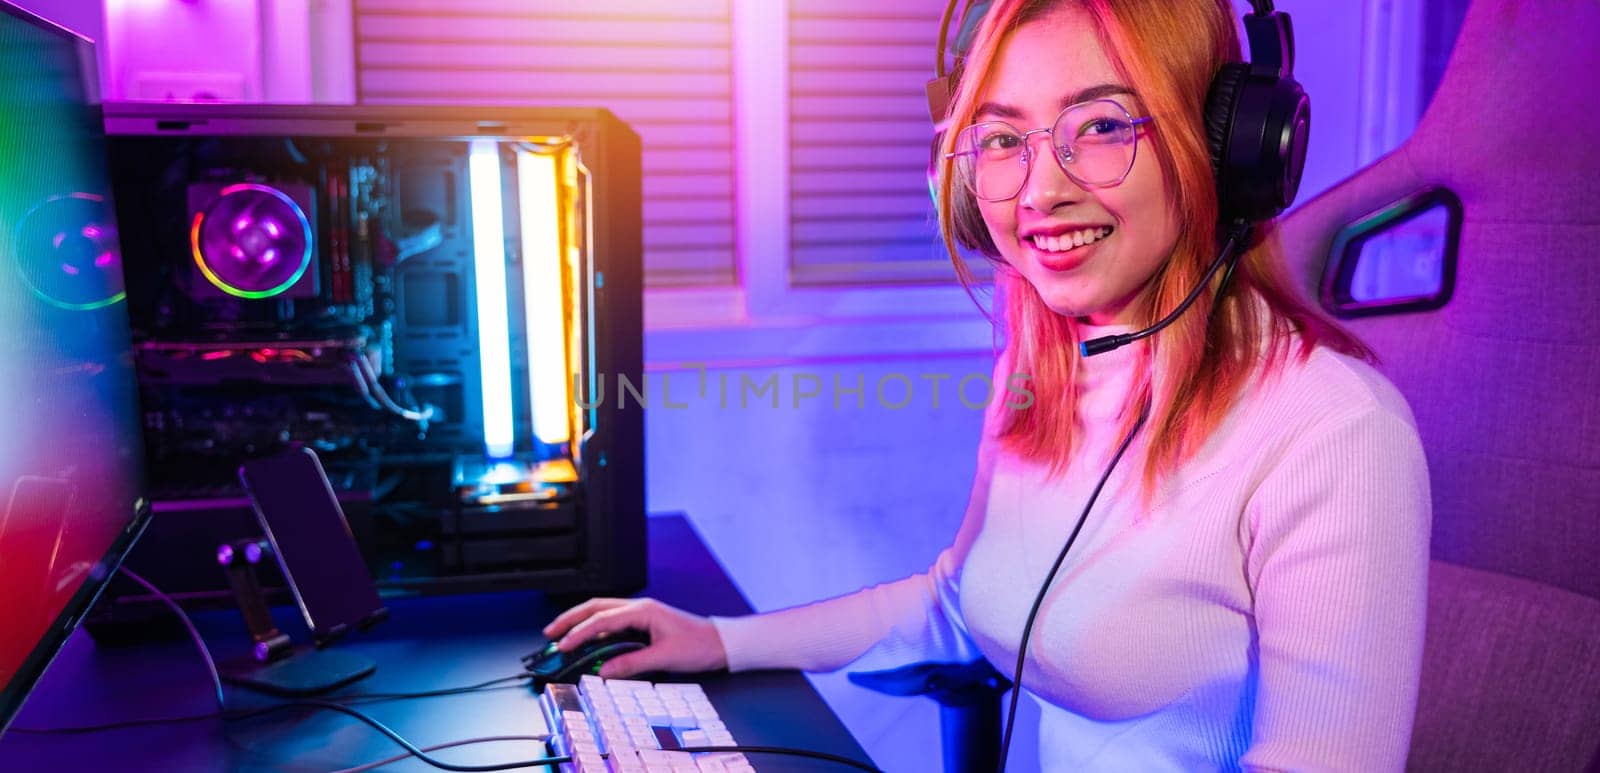 Smiling young woman wearing gaming headphones intend to do playing live stream games online at home looking to camera, Happy Gamer endeavor plays online video games tournament with computer neon light